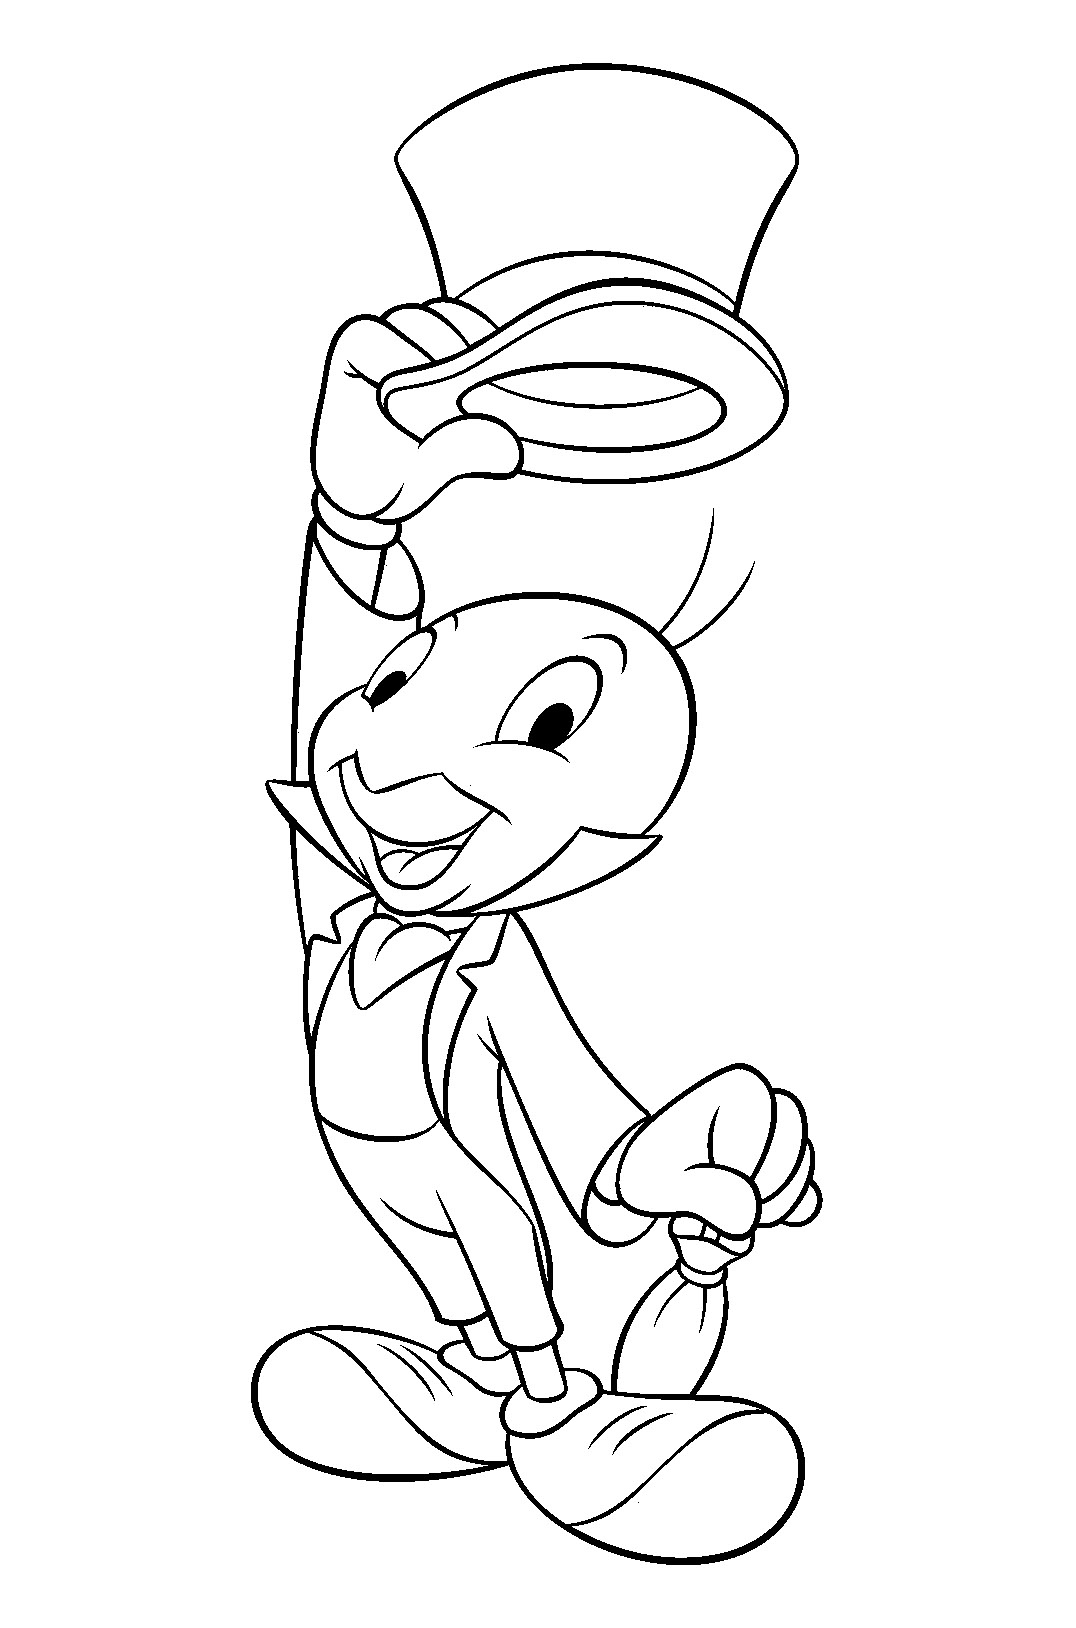 Jiminy Cricket In Pinocchio Coloring Page